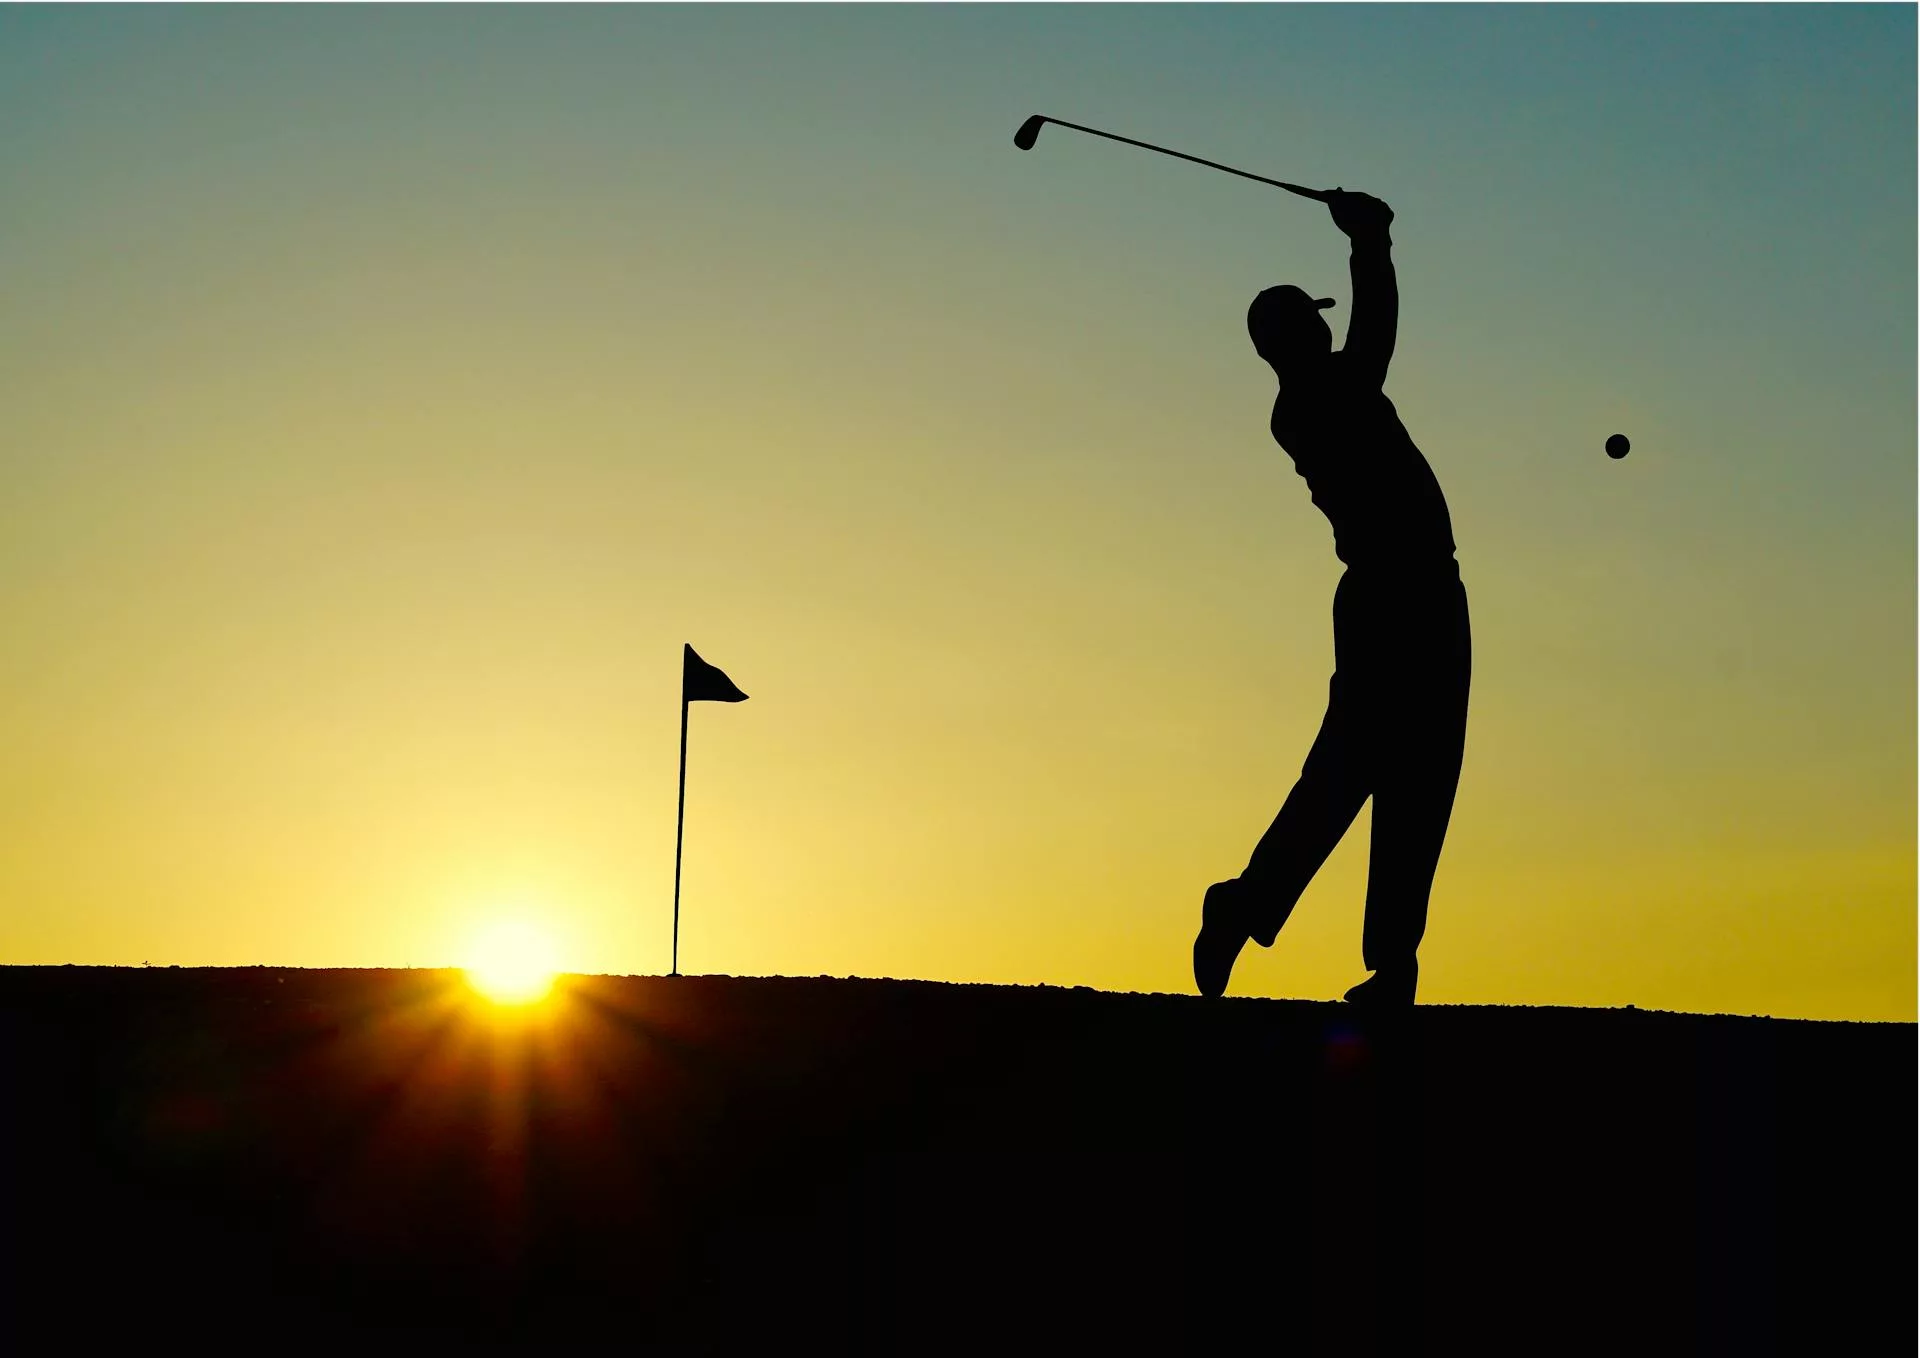 Golfer swinging club with ball in mid-air against sunset backdrop.